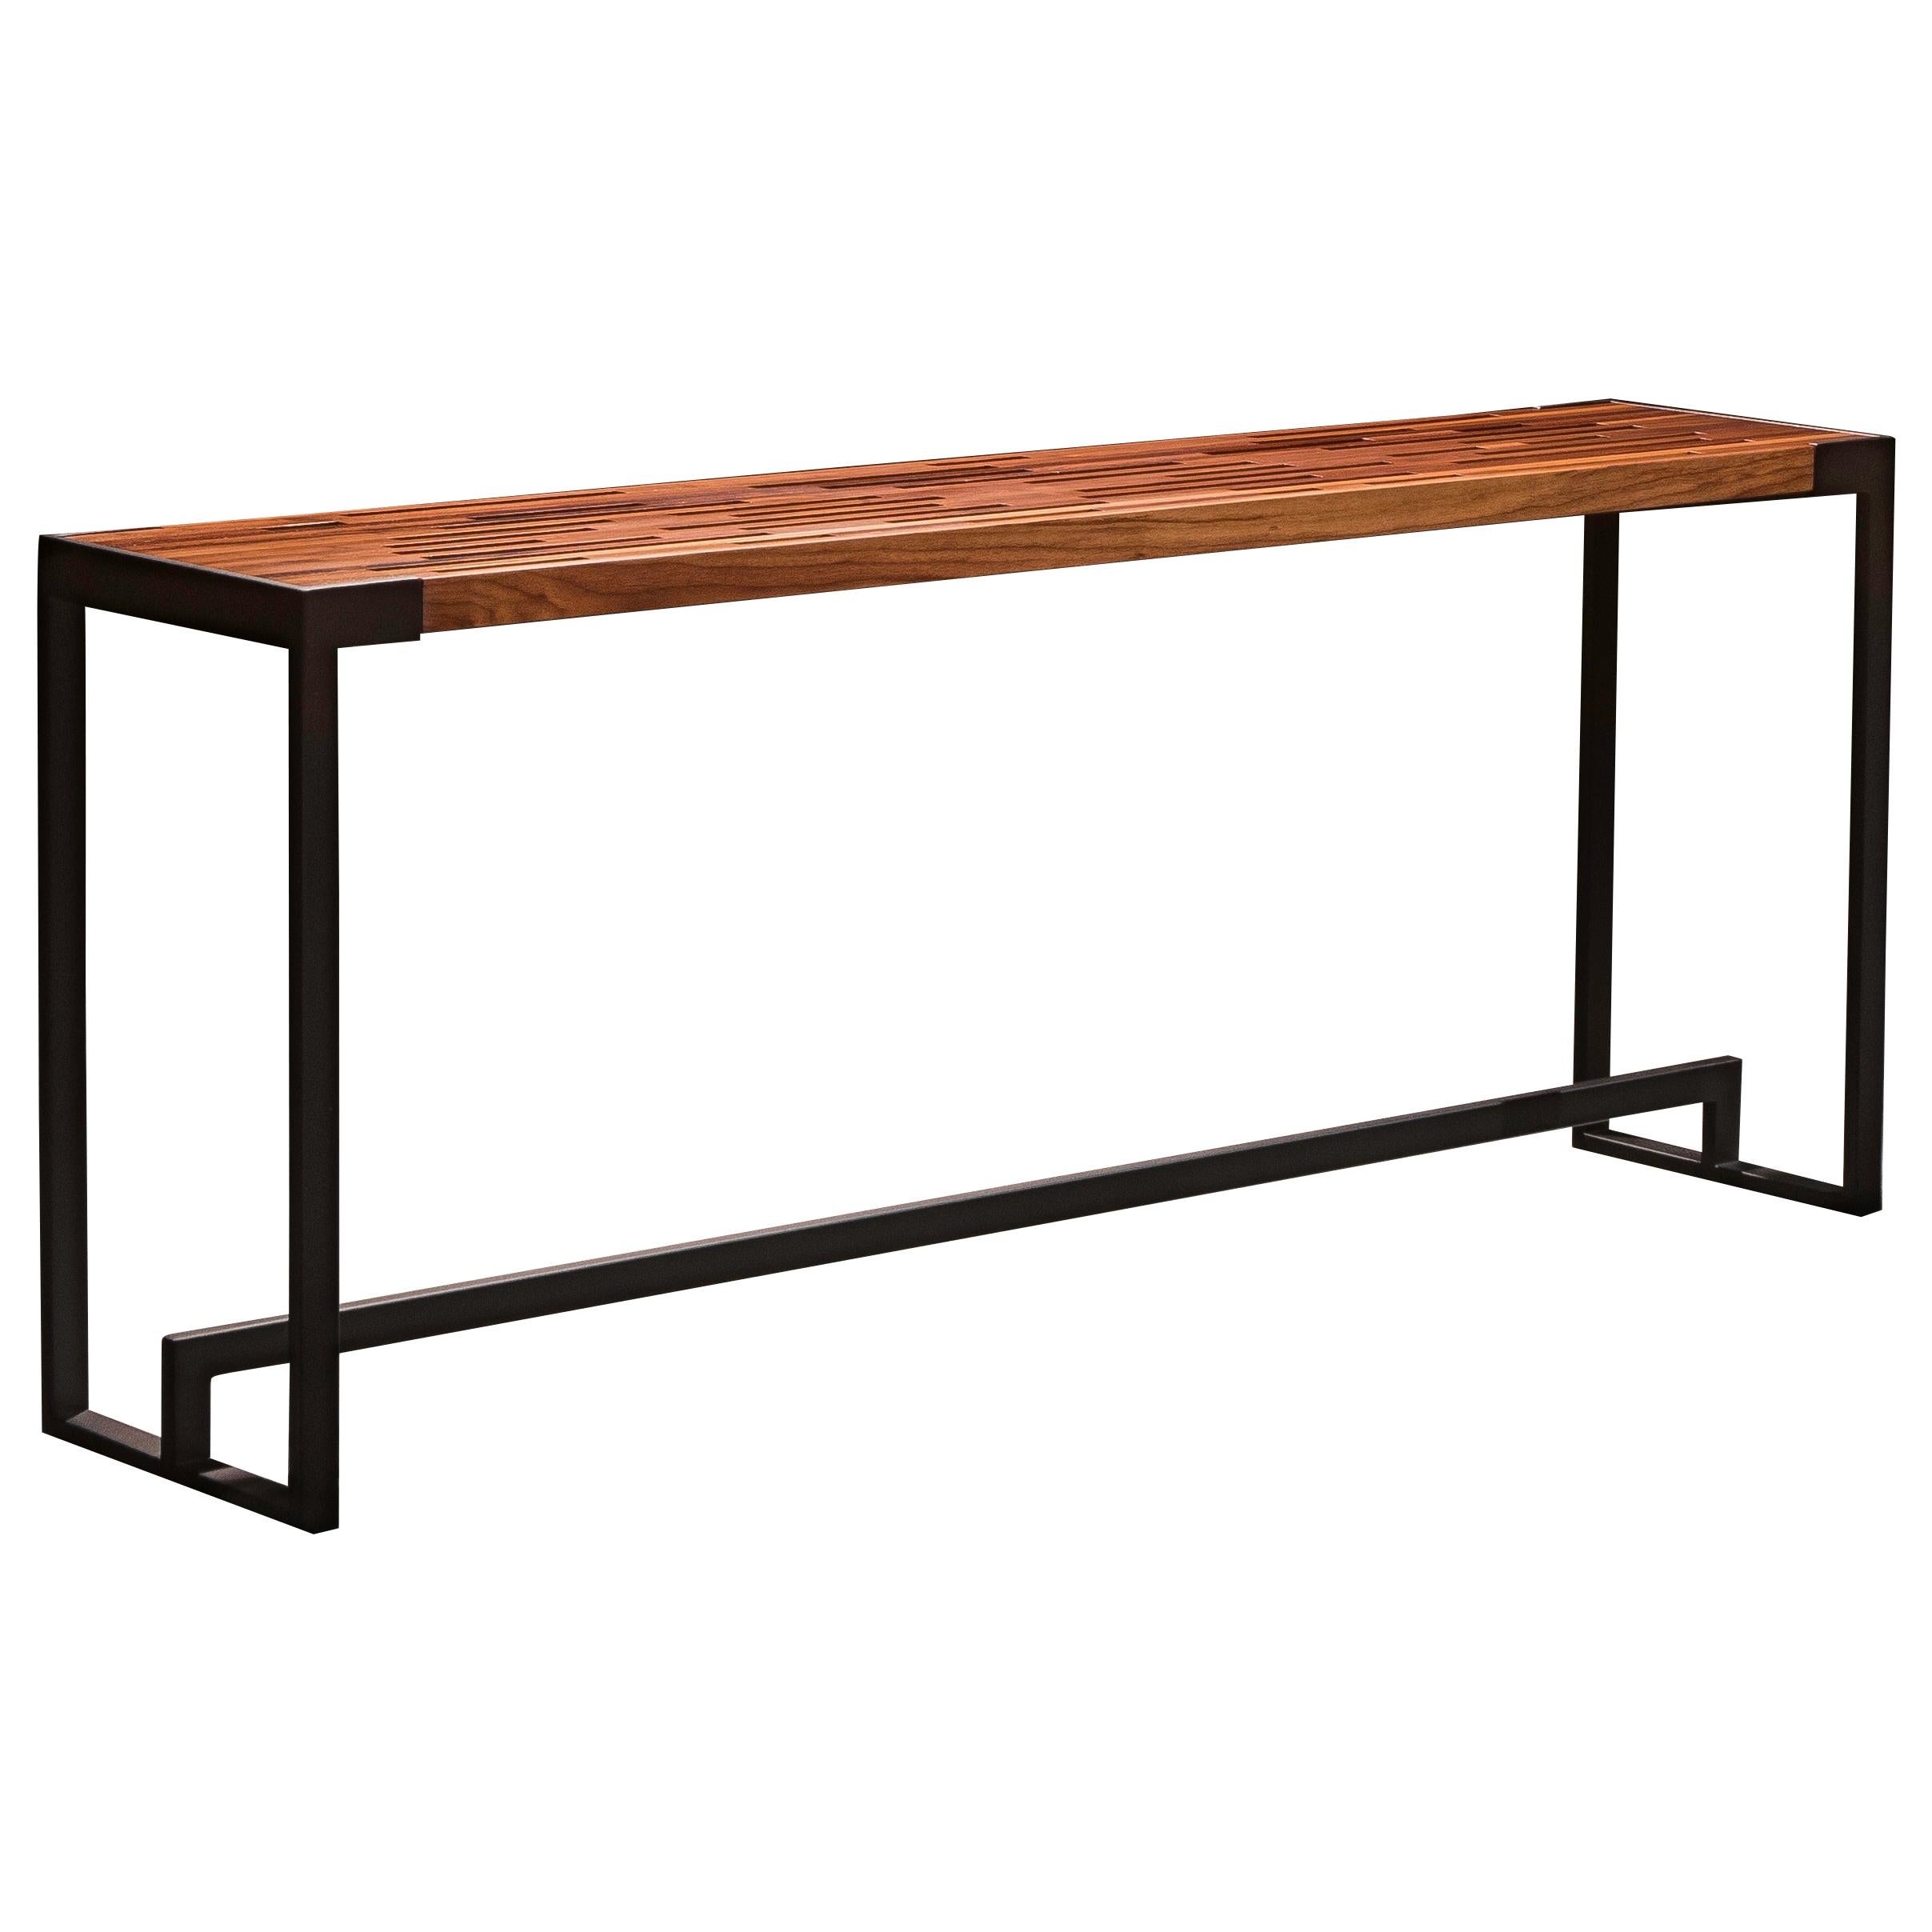 Slotted Solid Walnut Console Table on Black Steel Base "Scripps Console Table" For Sale